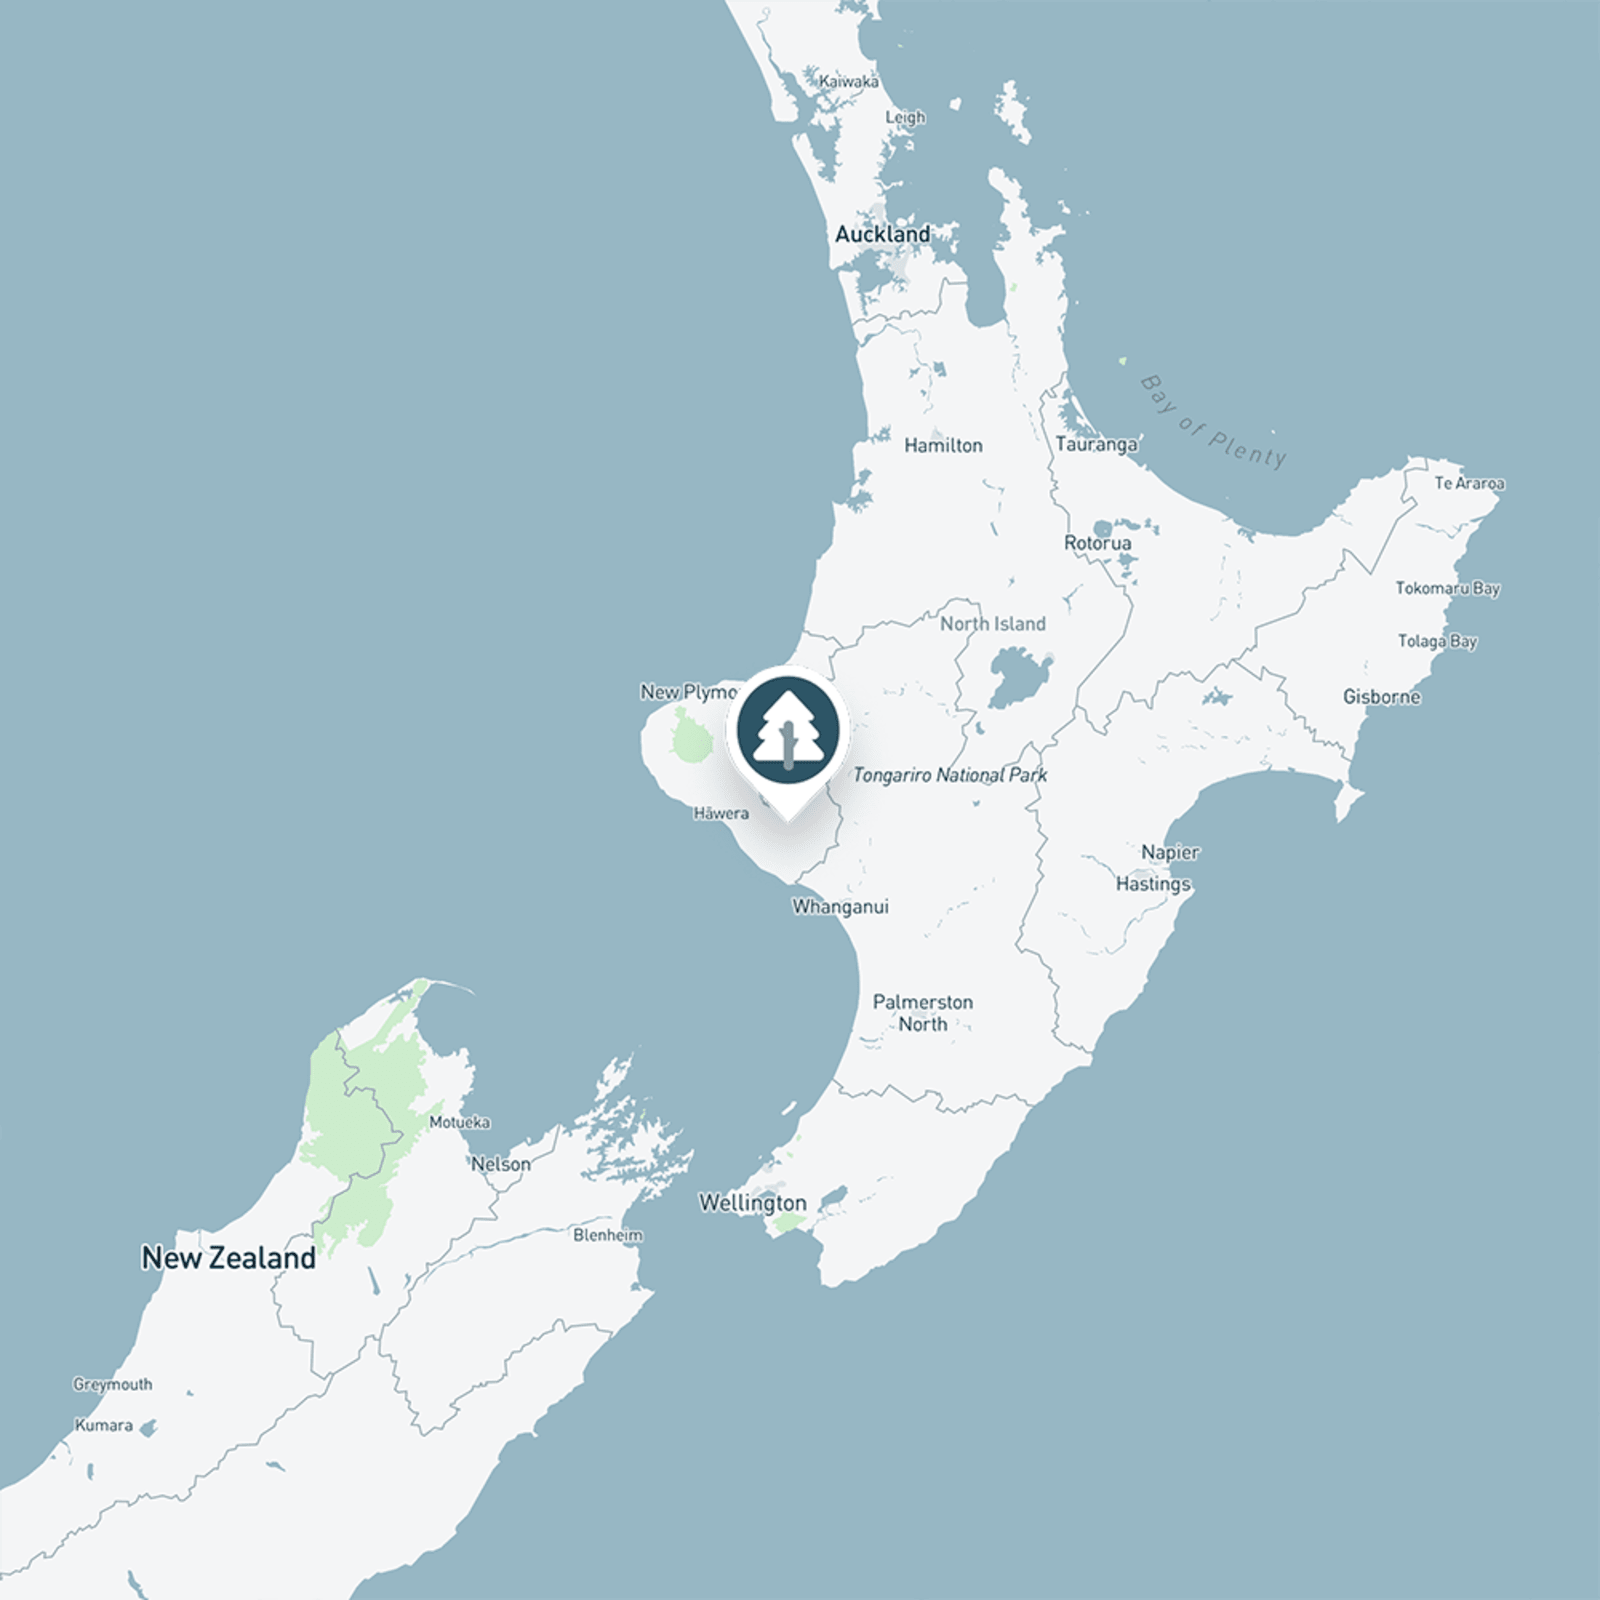 Map of New Zealand showing location of a reforest development